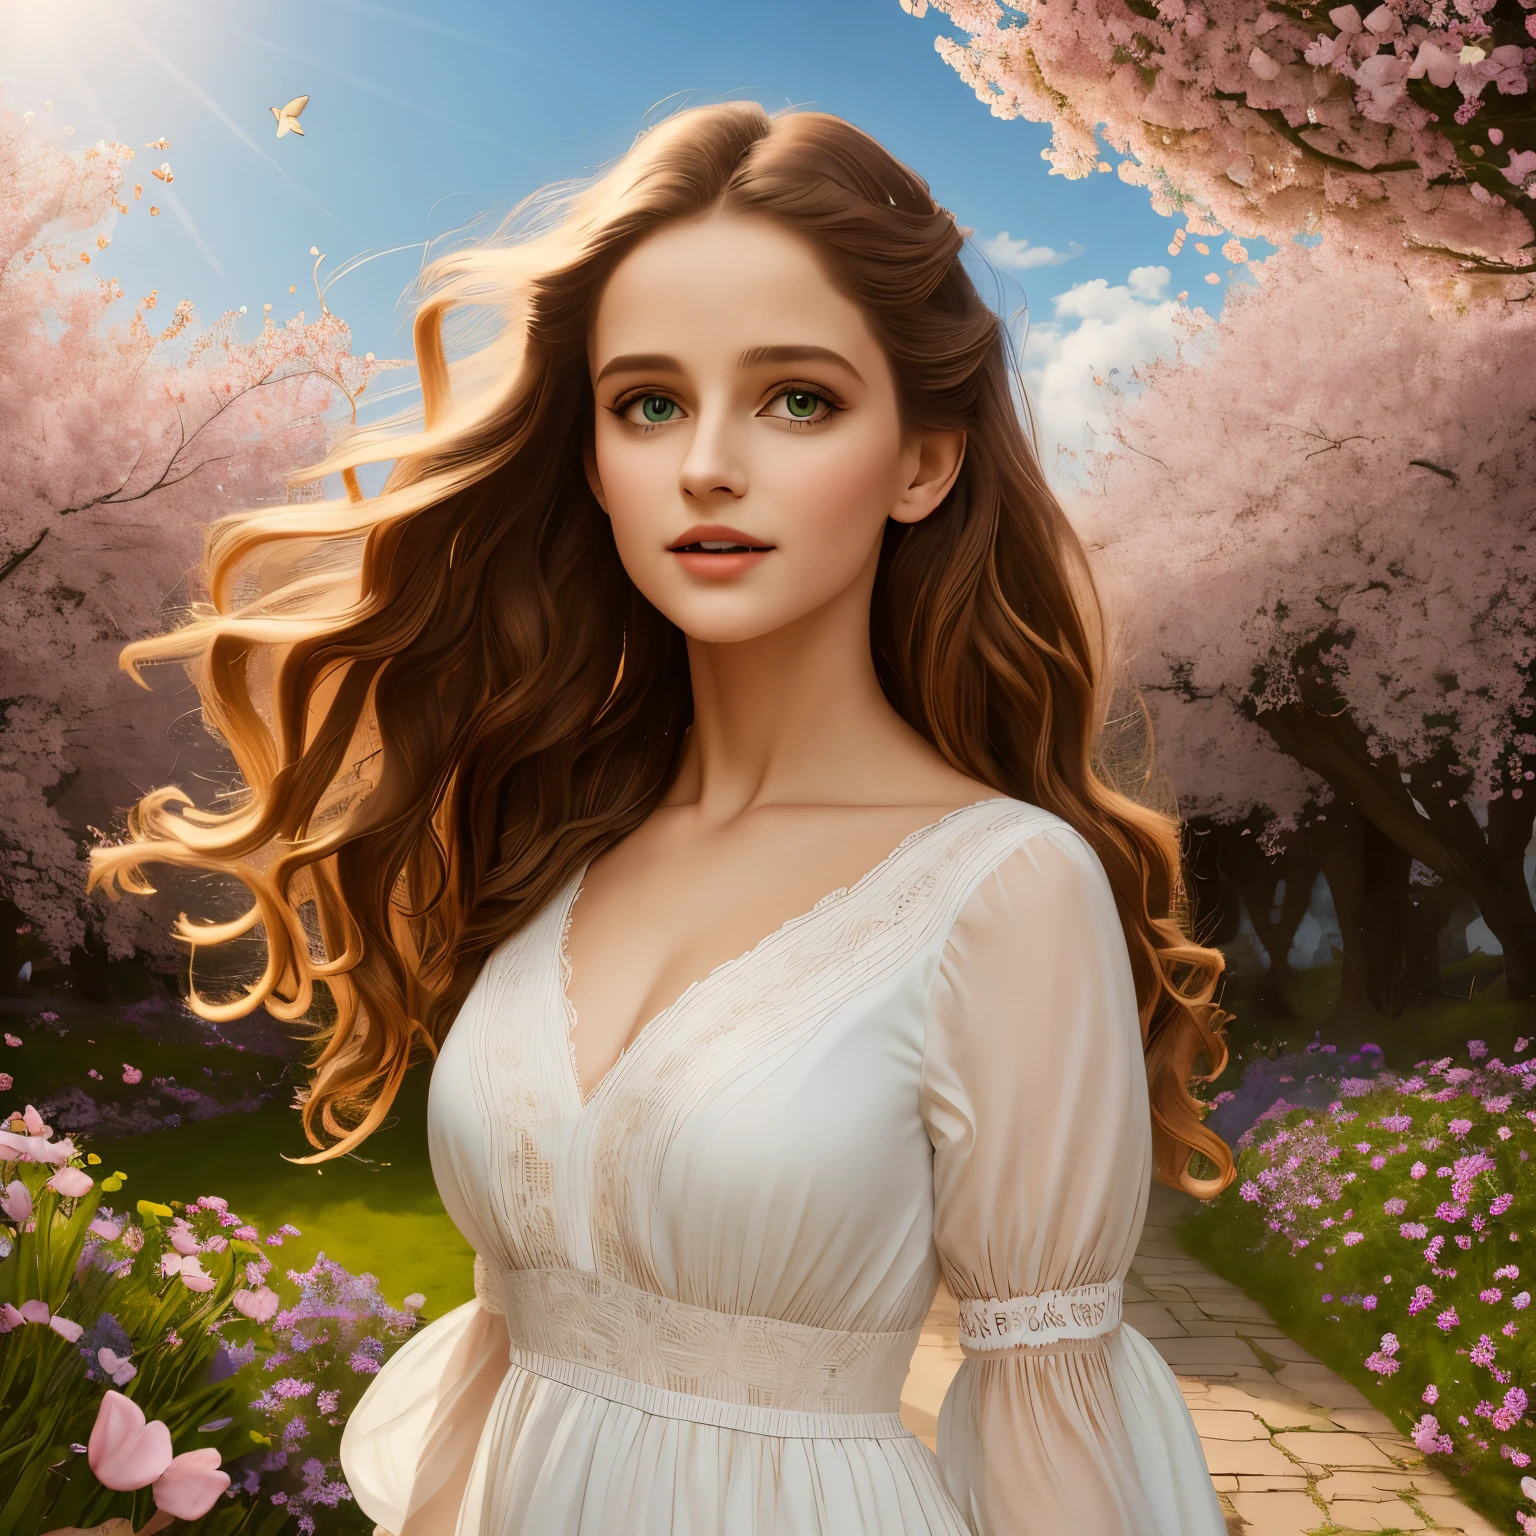 (best quality,4k,8k,highres,masterpiece:1.2),ultra-detailed,beautiful detailed eyes,beautiful detailed lips,extremely detailed eyes and face,long eyelashes,portraits,photography,realistic,shine on hair,soft lighting,soft focus,rosy cheeks,natural colors,gentle breeze,fresh flowers,butterflies flying around,a girl in a garden,dressed in a flowy white dress,standing under a blossoming cherry tree with pink petals falling,surrounded by vibrant green grass and colorful flowers,peaceful and serene atmosphere,joyful expression on her face,daytime scene,blue sky with white fluffy clouds.deep colors, vibrant composition, surreal atmosphere, dreamlike scenery, enigmatic figures, mesmerizing details, intricate textures, ethereal lighting, magical ambiance, otherworldly beauty, captivating storytelling, hidden symbolism, emotional depth, immersive experience, visually stunning, breathtaking masterpiece,masterpiece, best quality, (extremely detailed CG unity 8k wallpaper), (best quality), (best illustration), (best shadow), absurdres, realistic lighting, (Abyss), beautiful detailed glow, art by PeterMohrBacher,